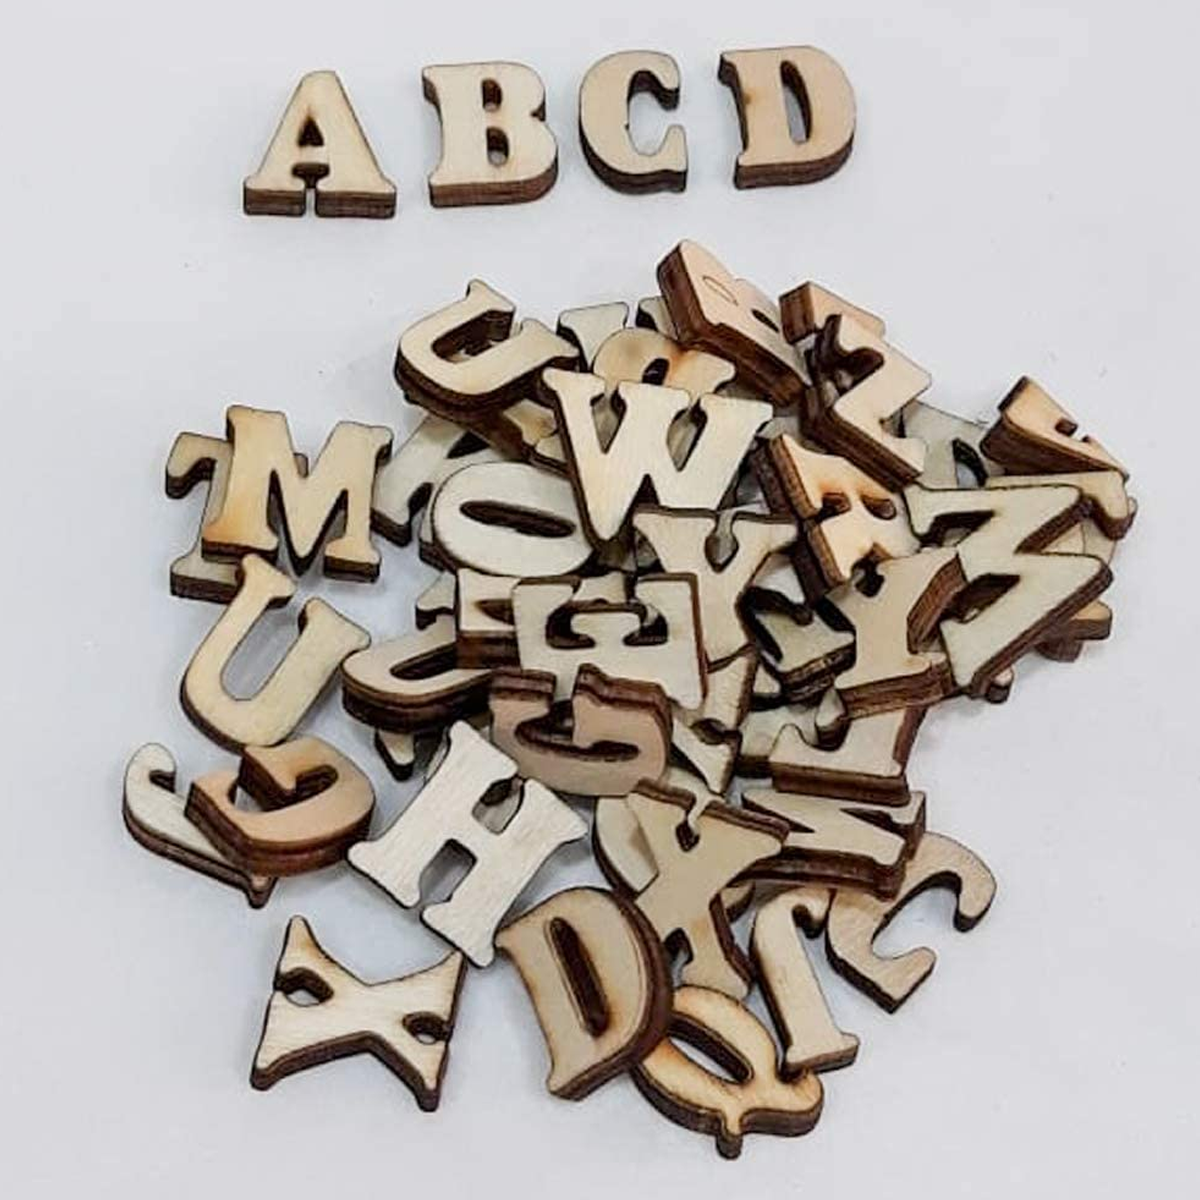 Mini Wooden Alphabets Class Party Arts and Crafts Supply 600 pieces - 1.5cm Height